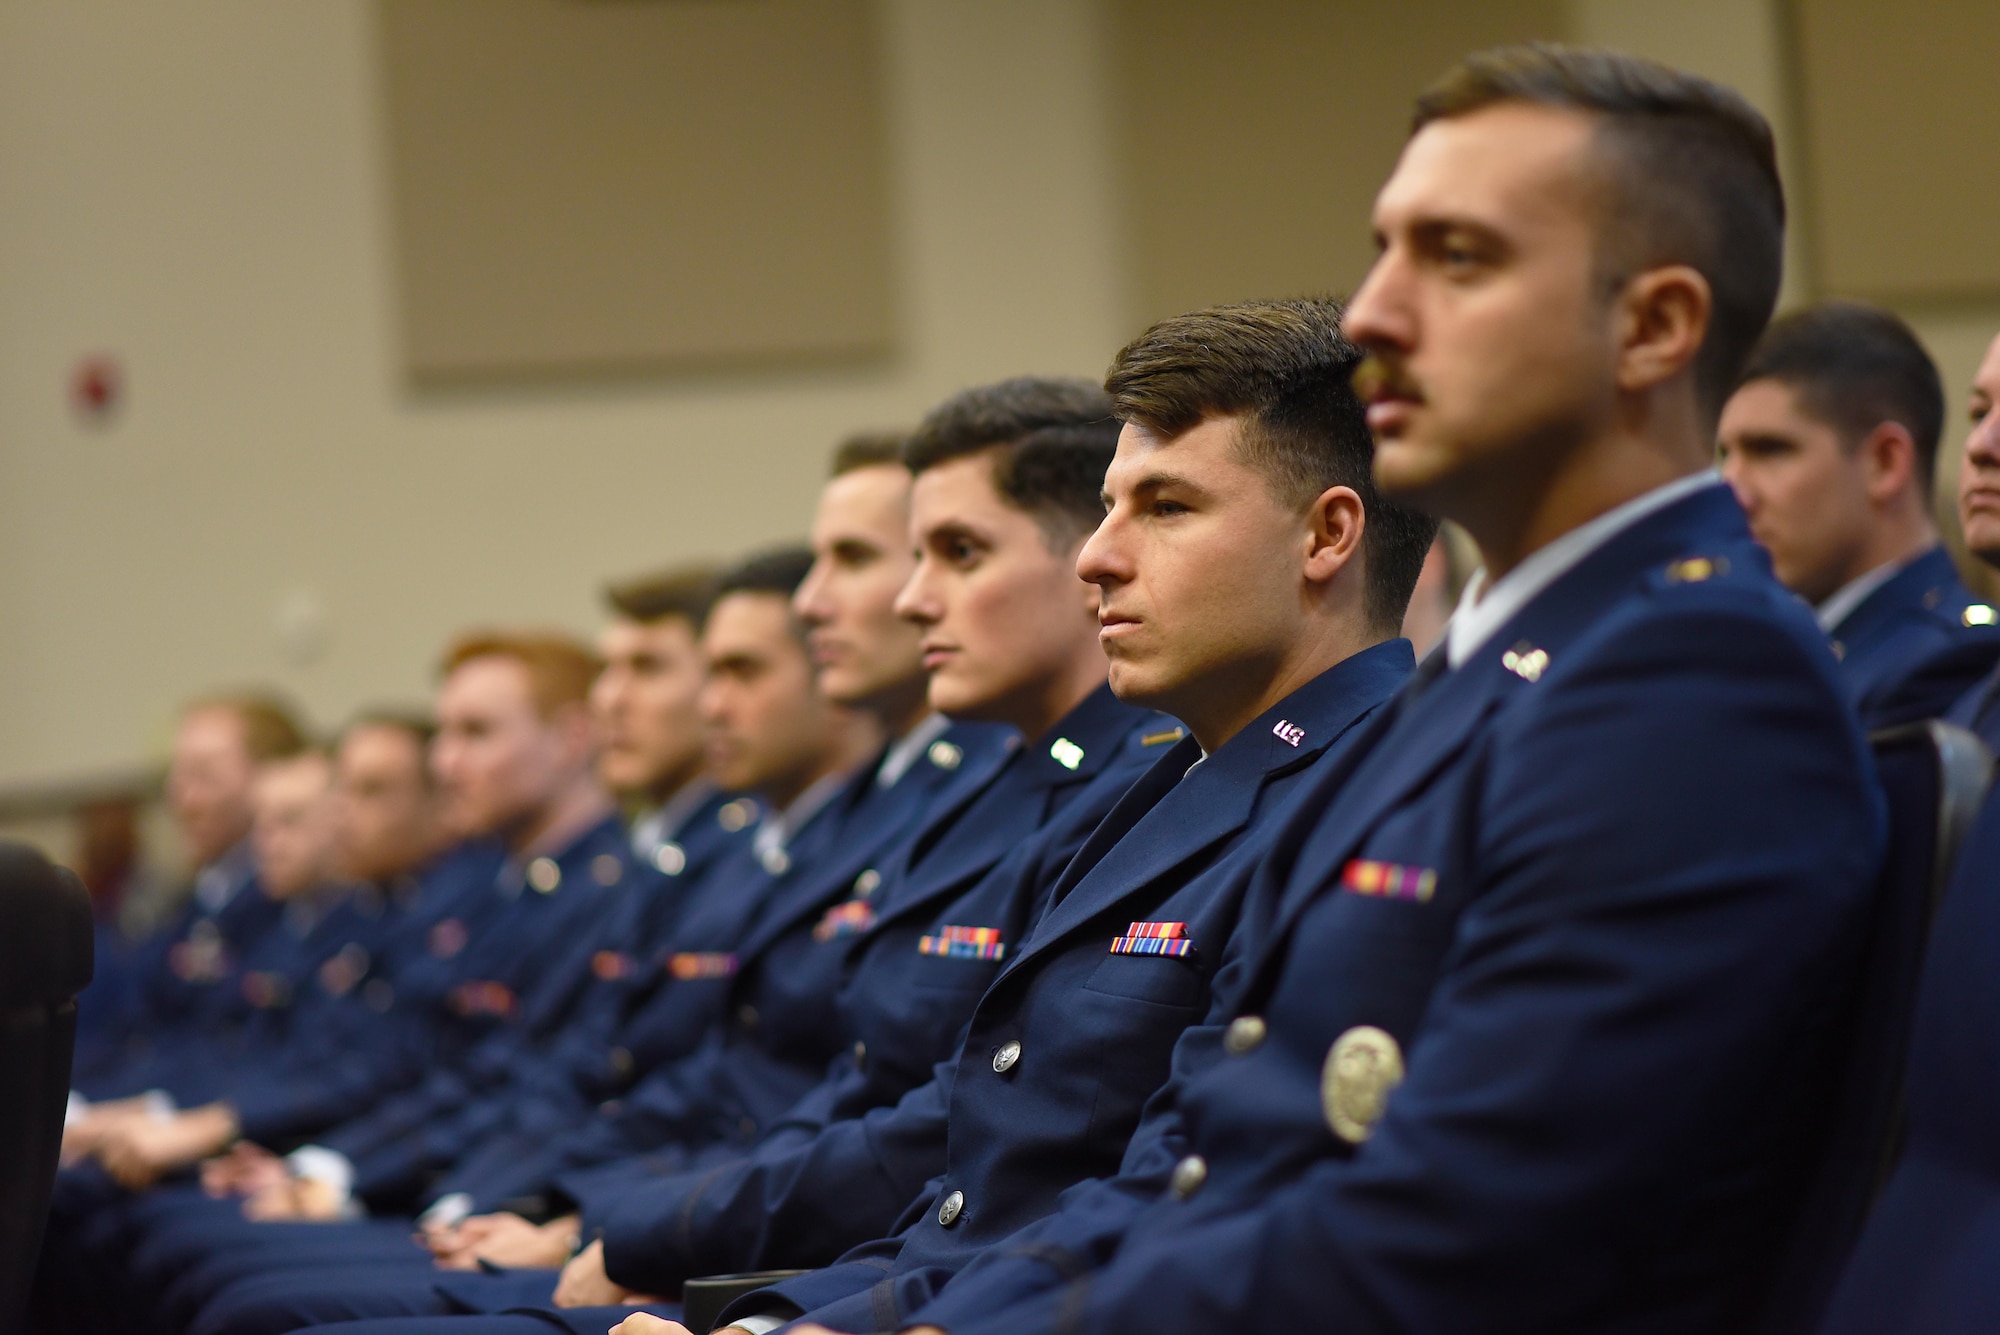 Specialized Undergraduate Pilot Training Class 20-06/07 sit in the Kaye Auditorium during their graduation ceremony Jan. 24, 2020, on Columbus Air Force Base, Mississippi. The graduating pilots will each depart to their new respective bases to fly aircraft such as the F-16 Fighting Falcon, C-17 Globemaster III, F-35 Lightning II, KC-135 Stratotanker, and more while some stay at Columbus to become First Assignment Instructor Pilots. (U.S. Air Force photo by Senior Airman Keith Holcomb)